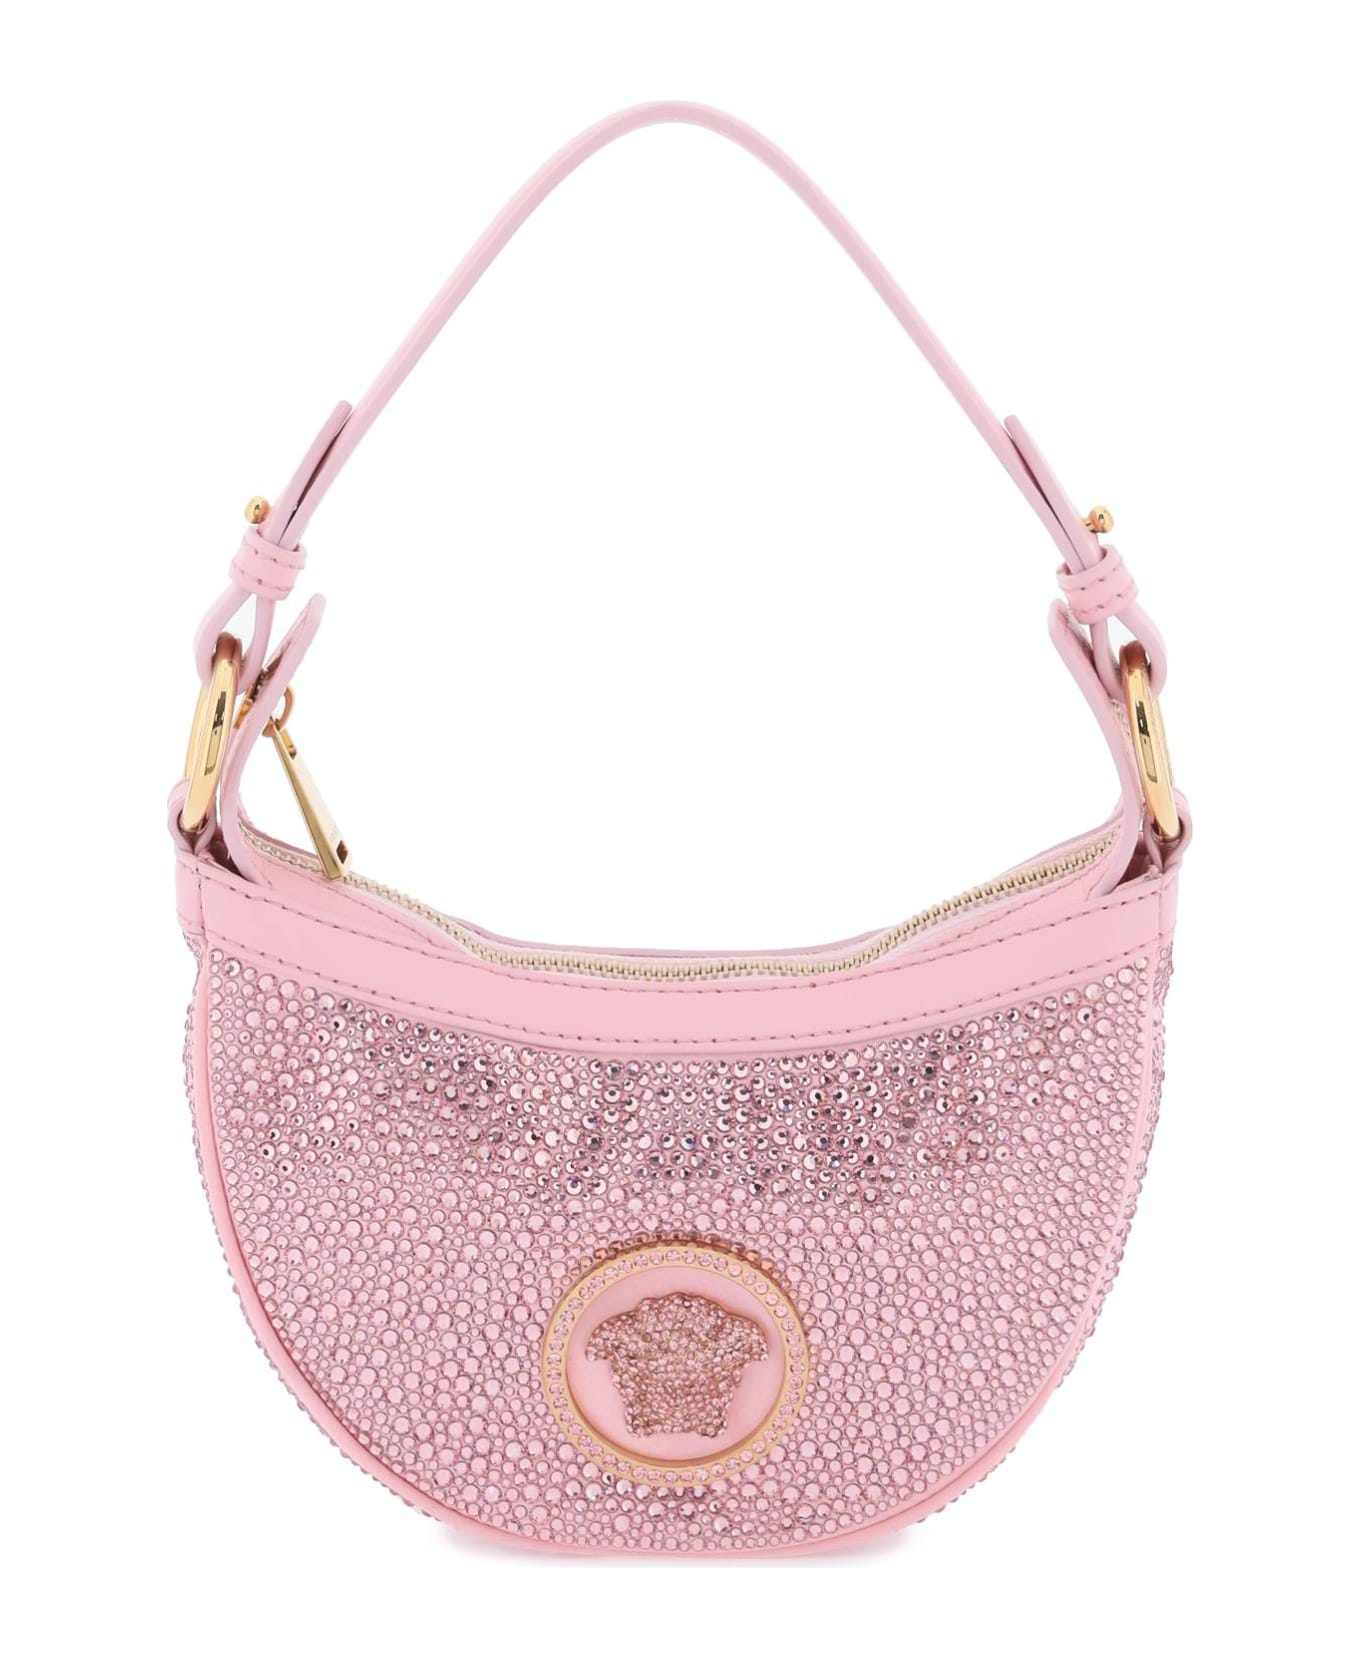 Versace Repeat Mini Hobo Bag With Crystals - PALE PINK VERSACE GOLD (Pink)